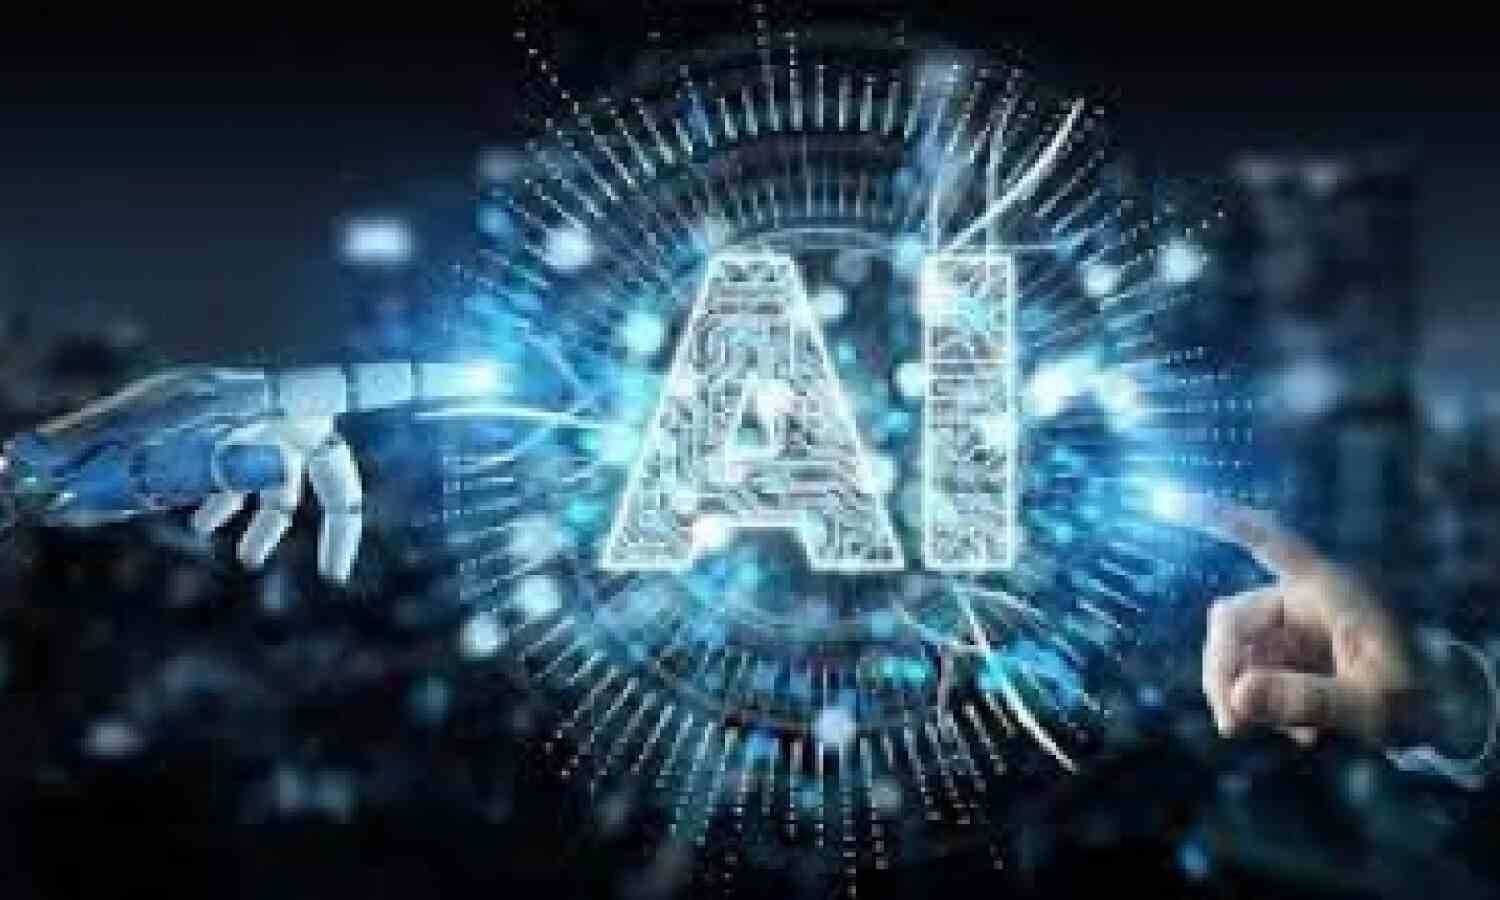 China launches project to promote use of AI in sci-tech research